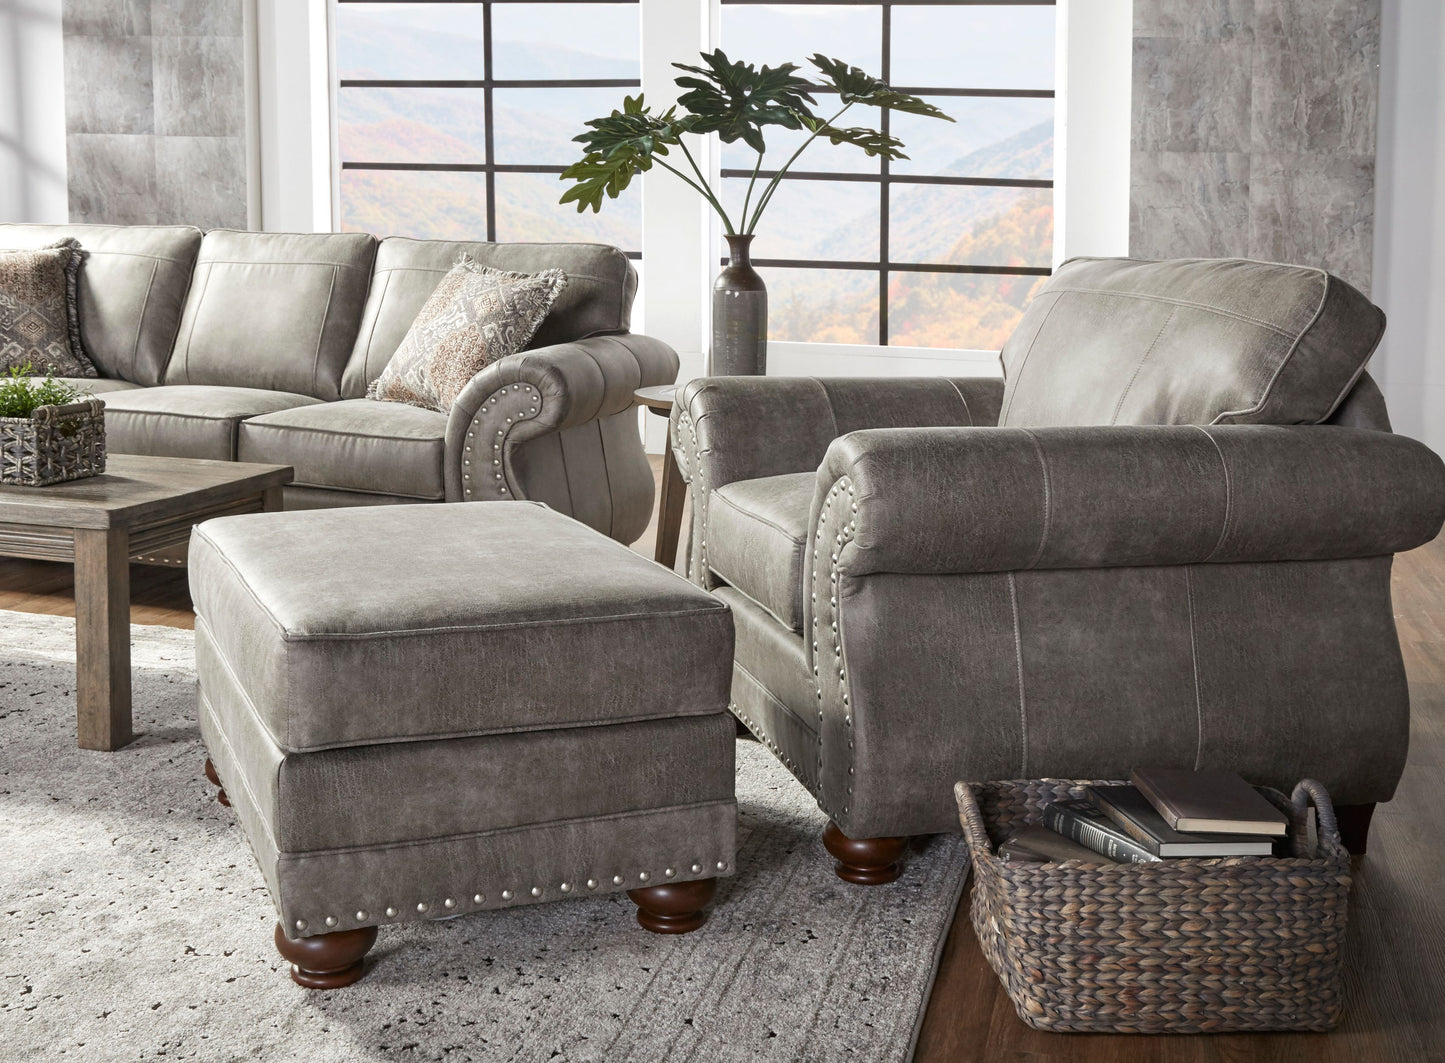 Leinster Faux Leather Upholstered Nailhead Chair and Ottoman in Stone Gray